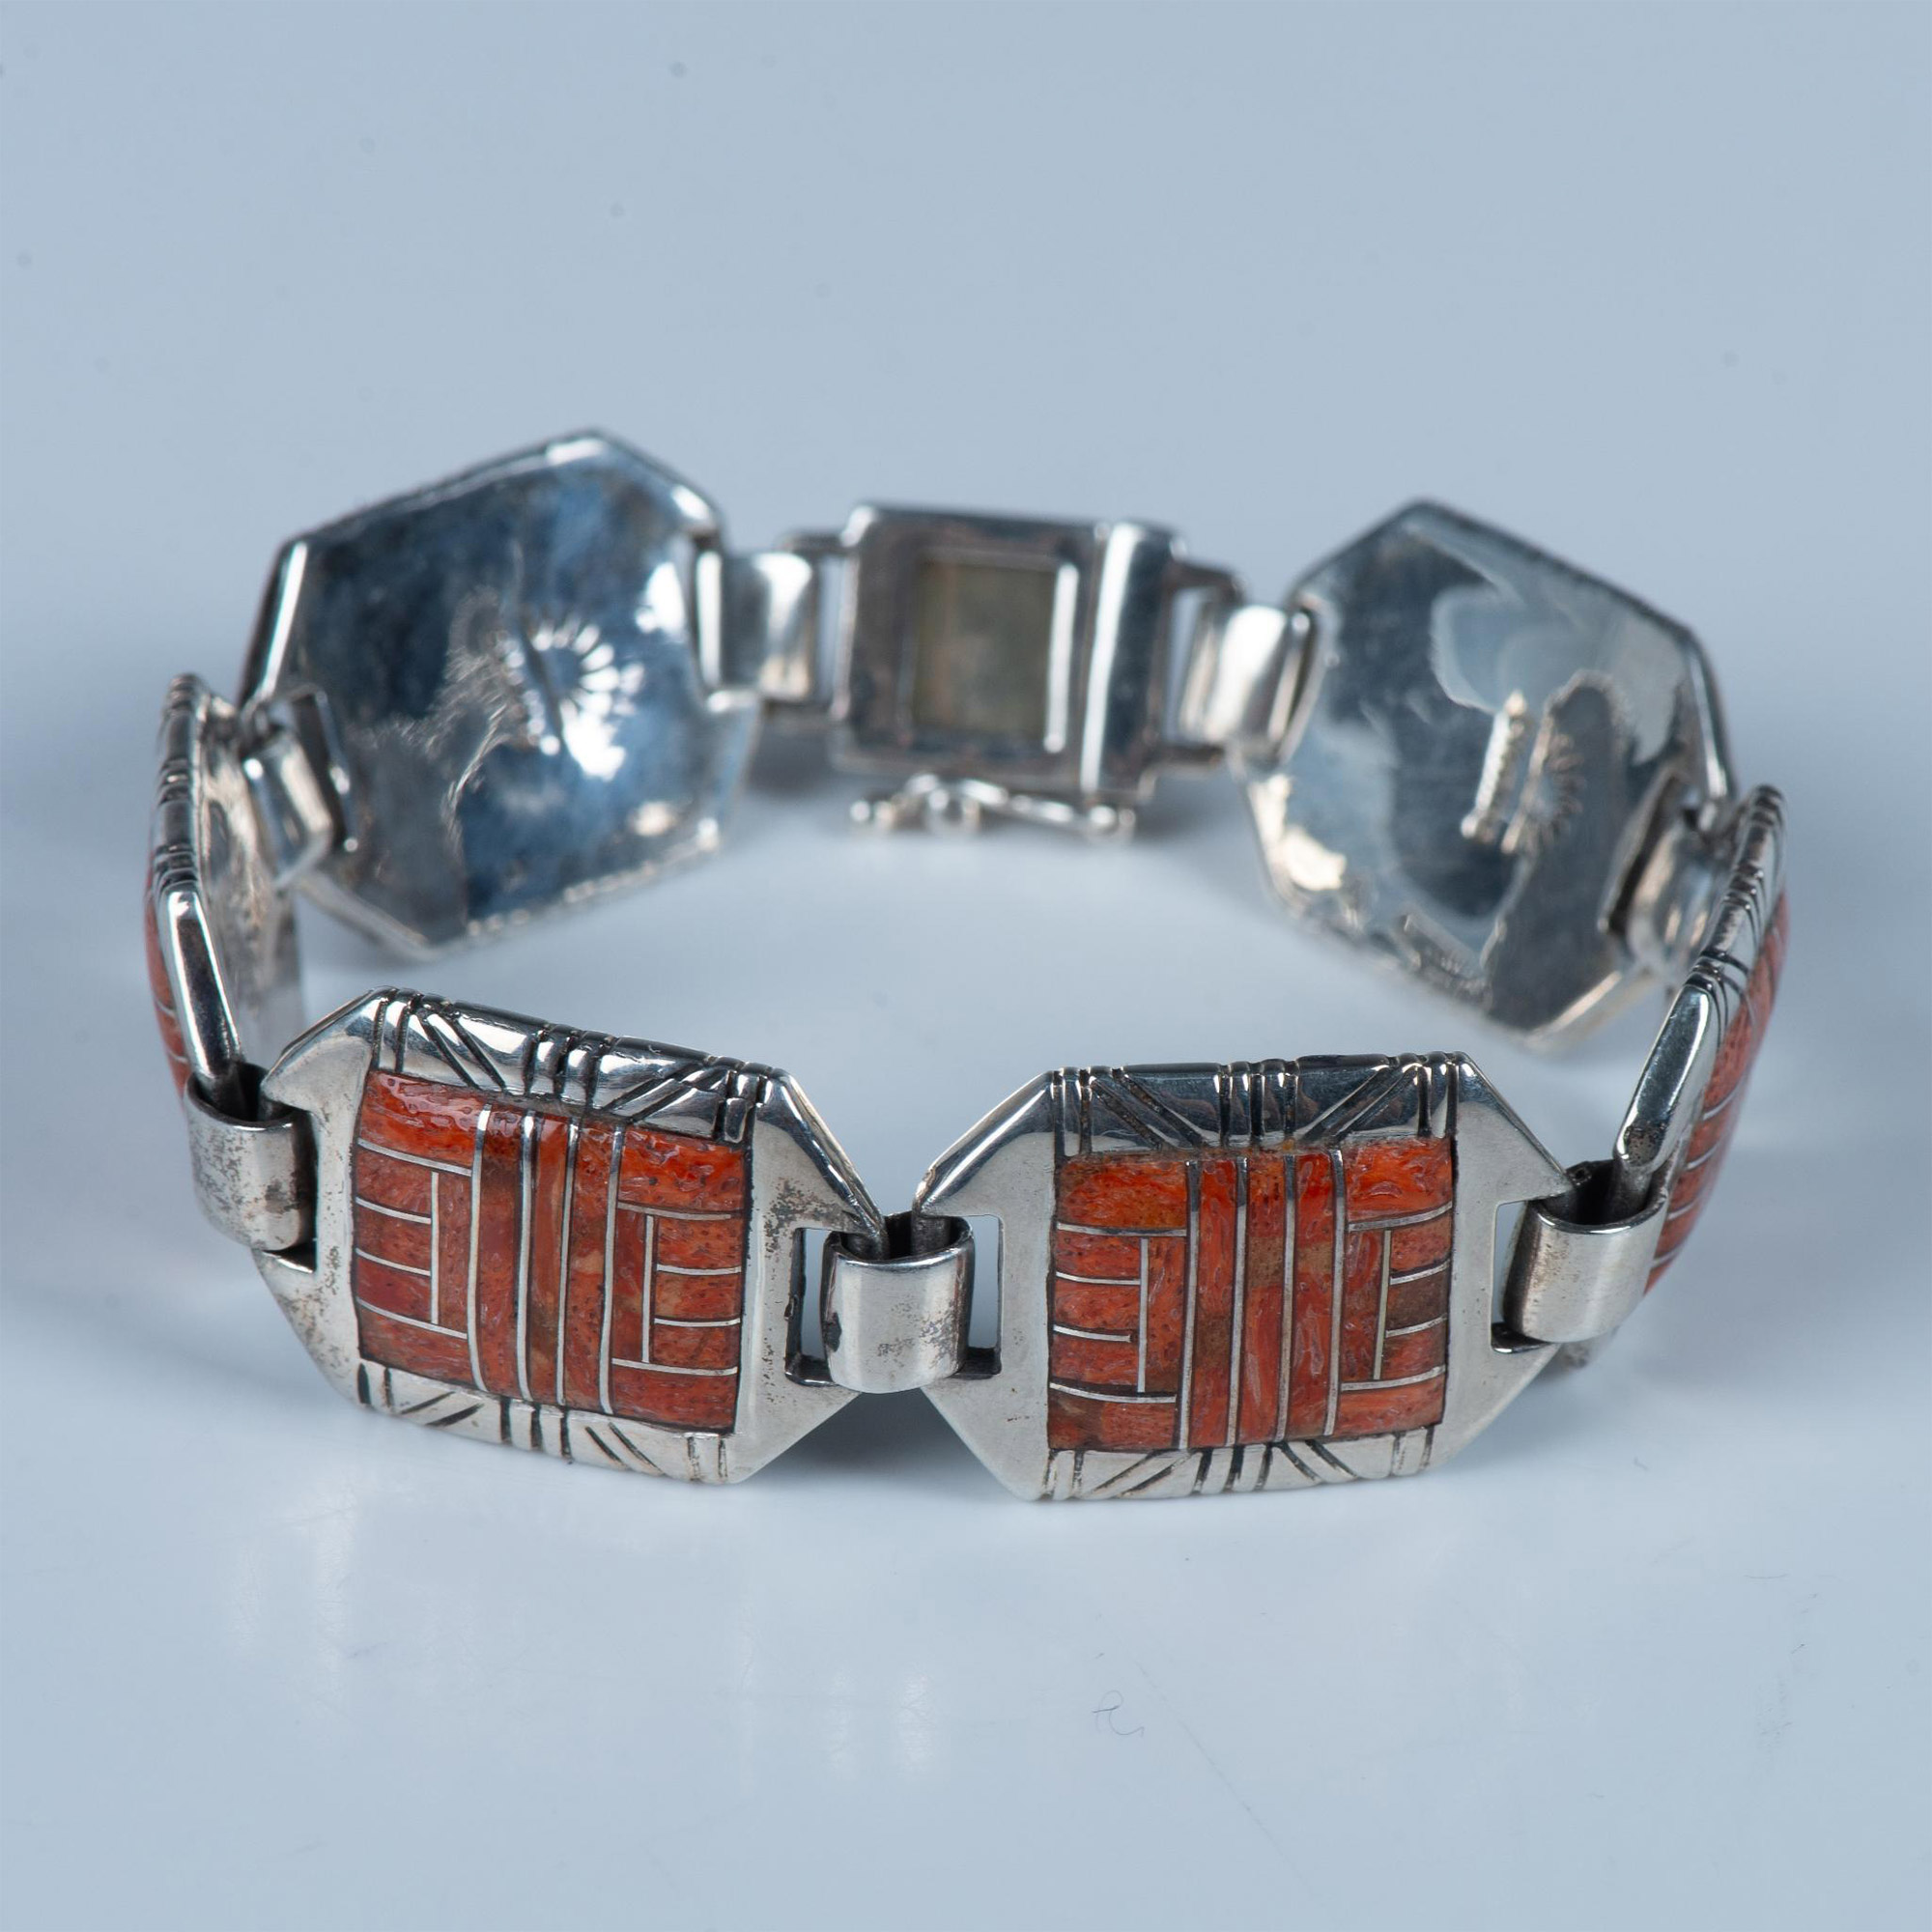 Zuni Contemporary Sterling Silver & Coral Inlay Bracelet - Image 4 of 5